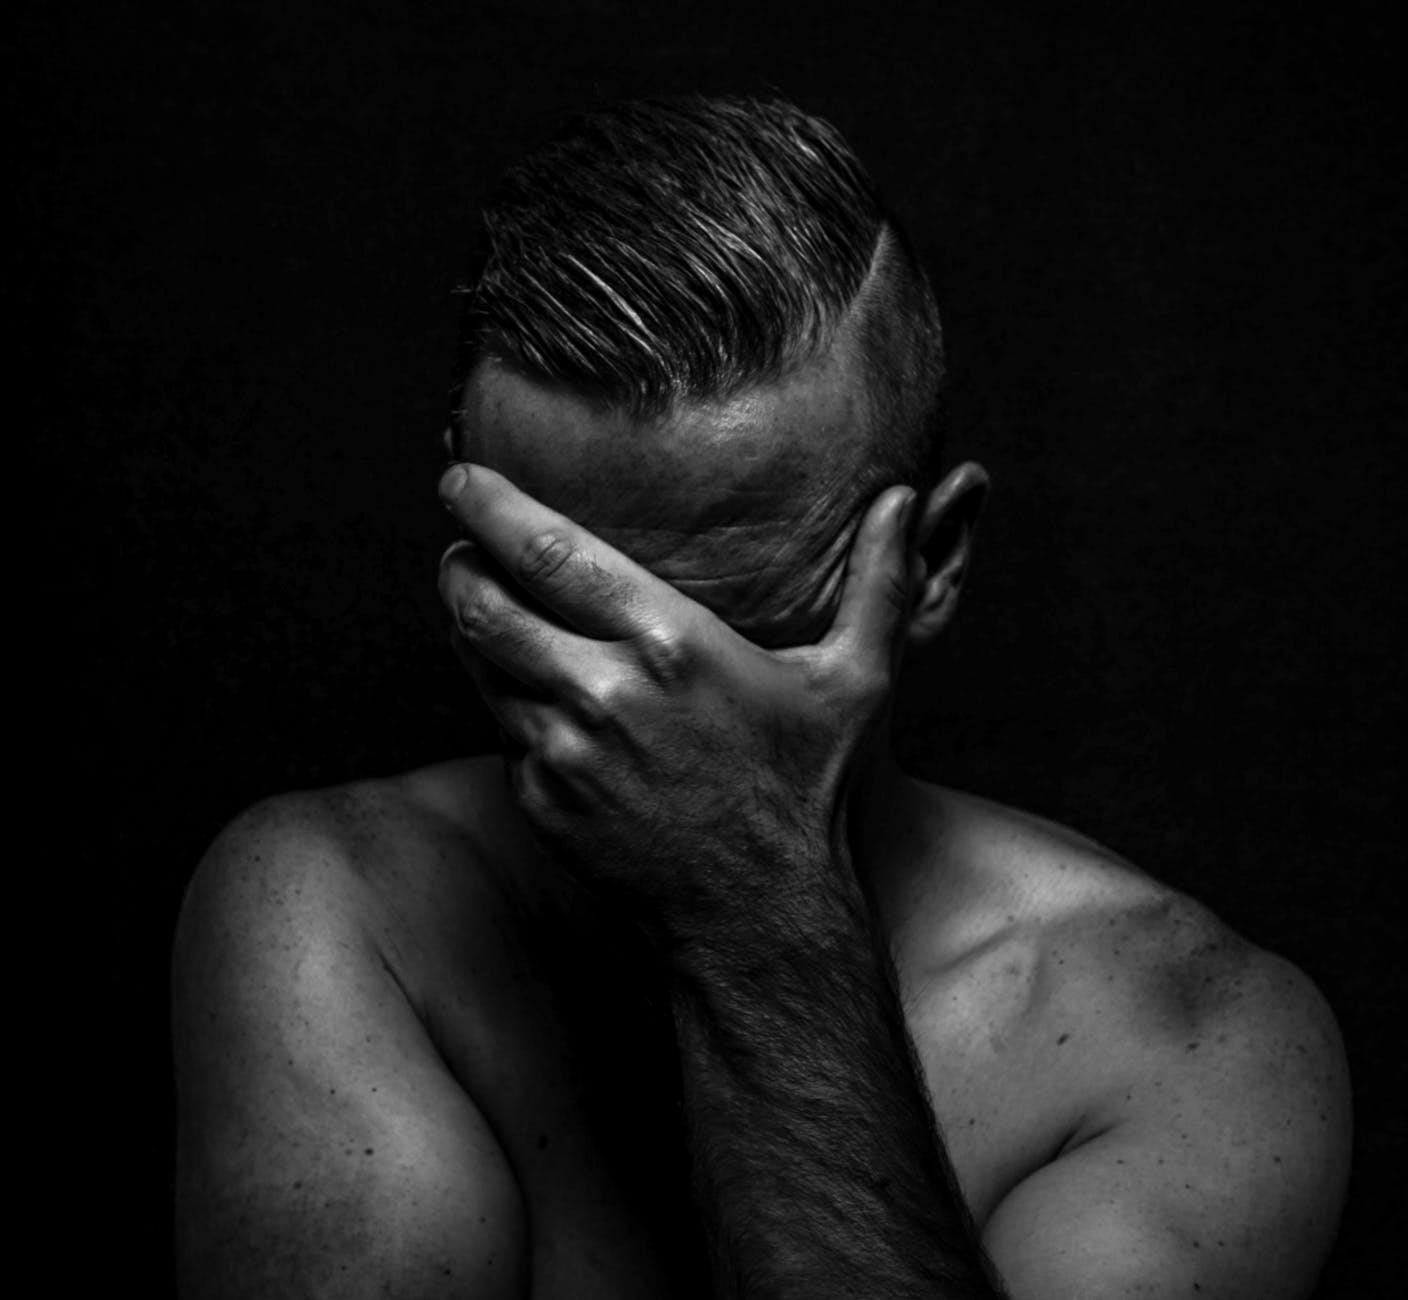 anonymous depressed shirtless man with modern hairstyle on black background